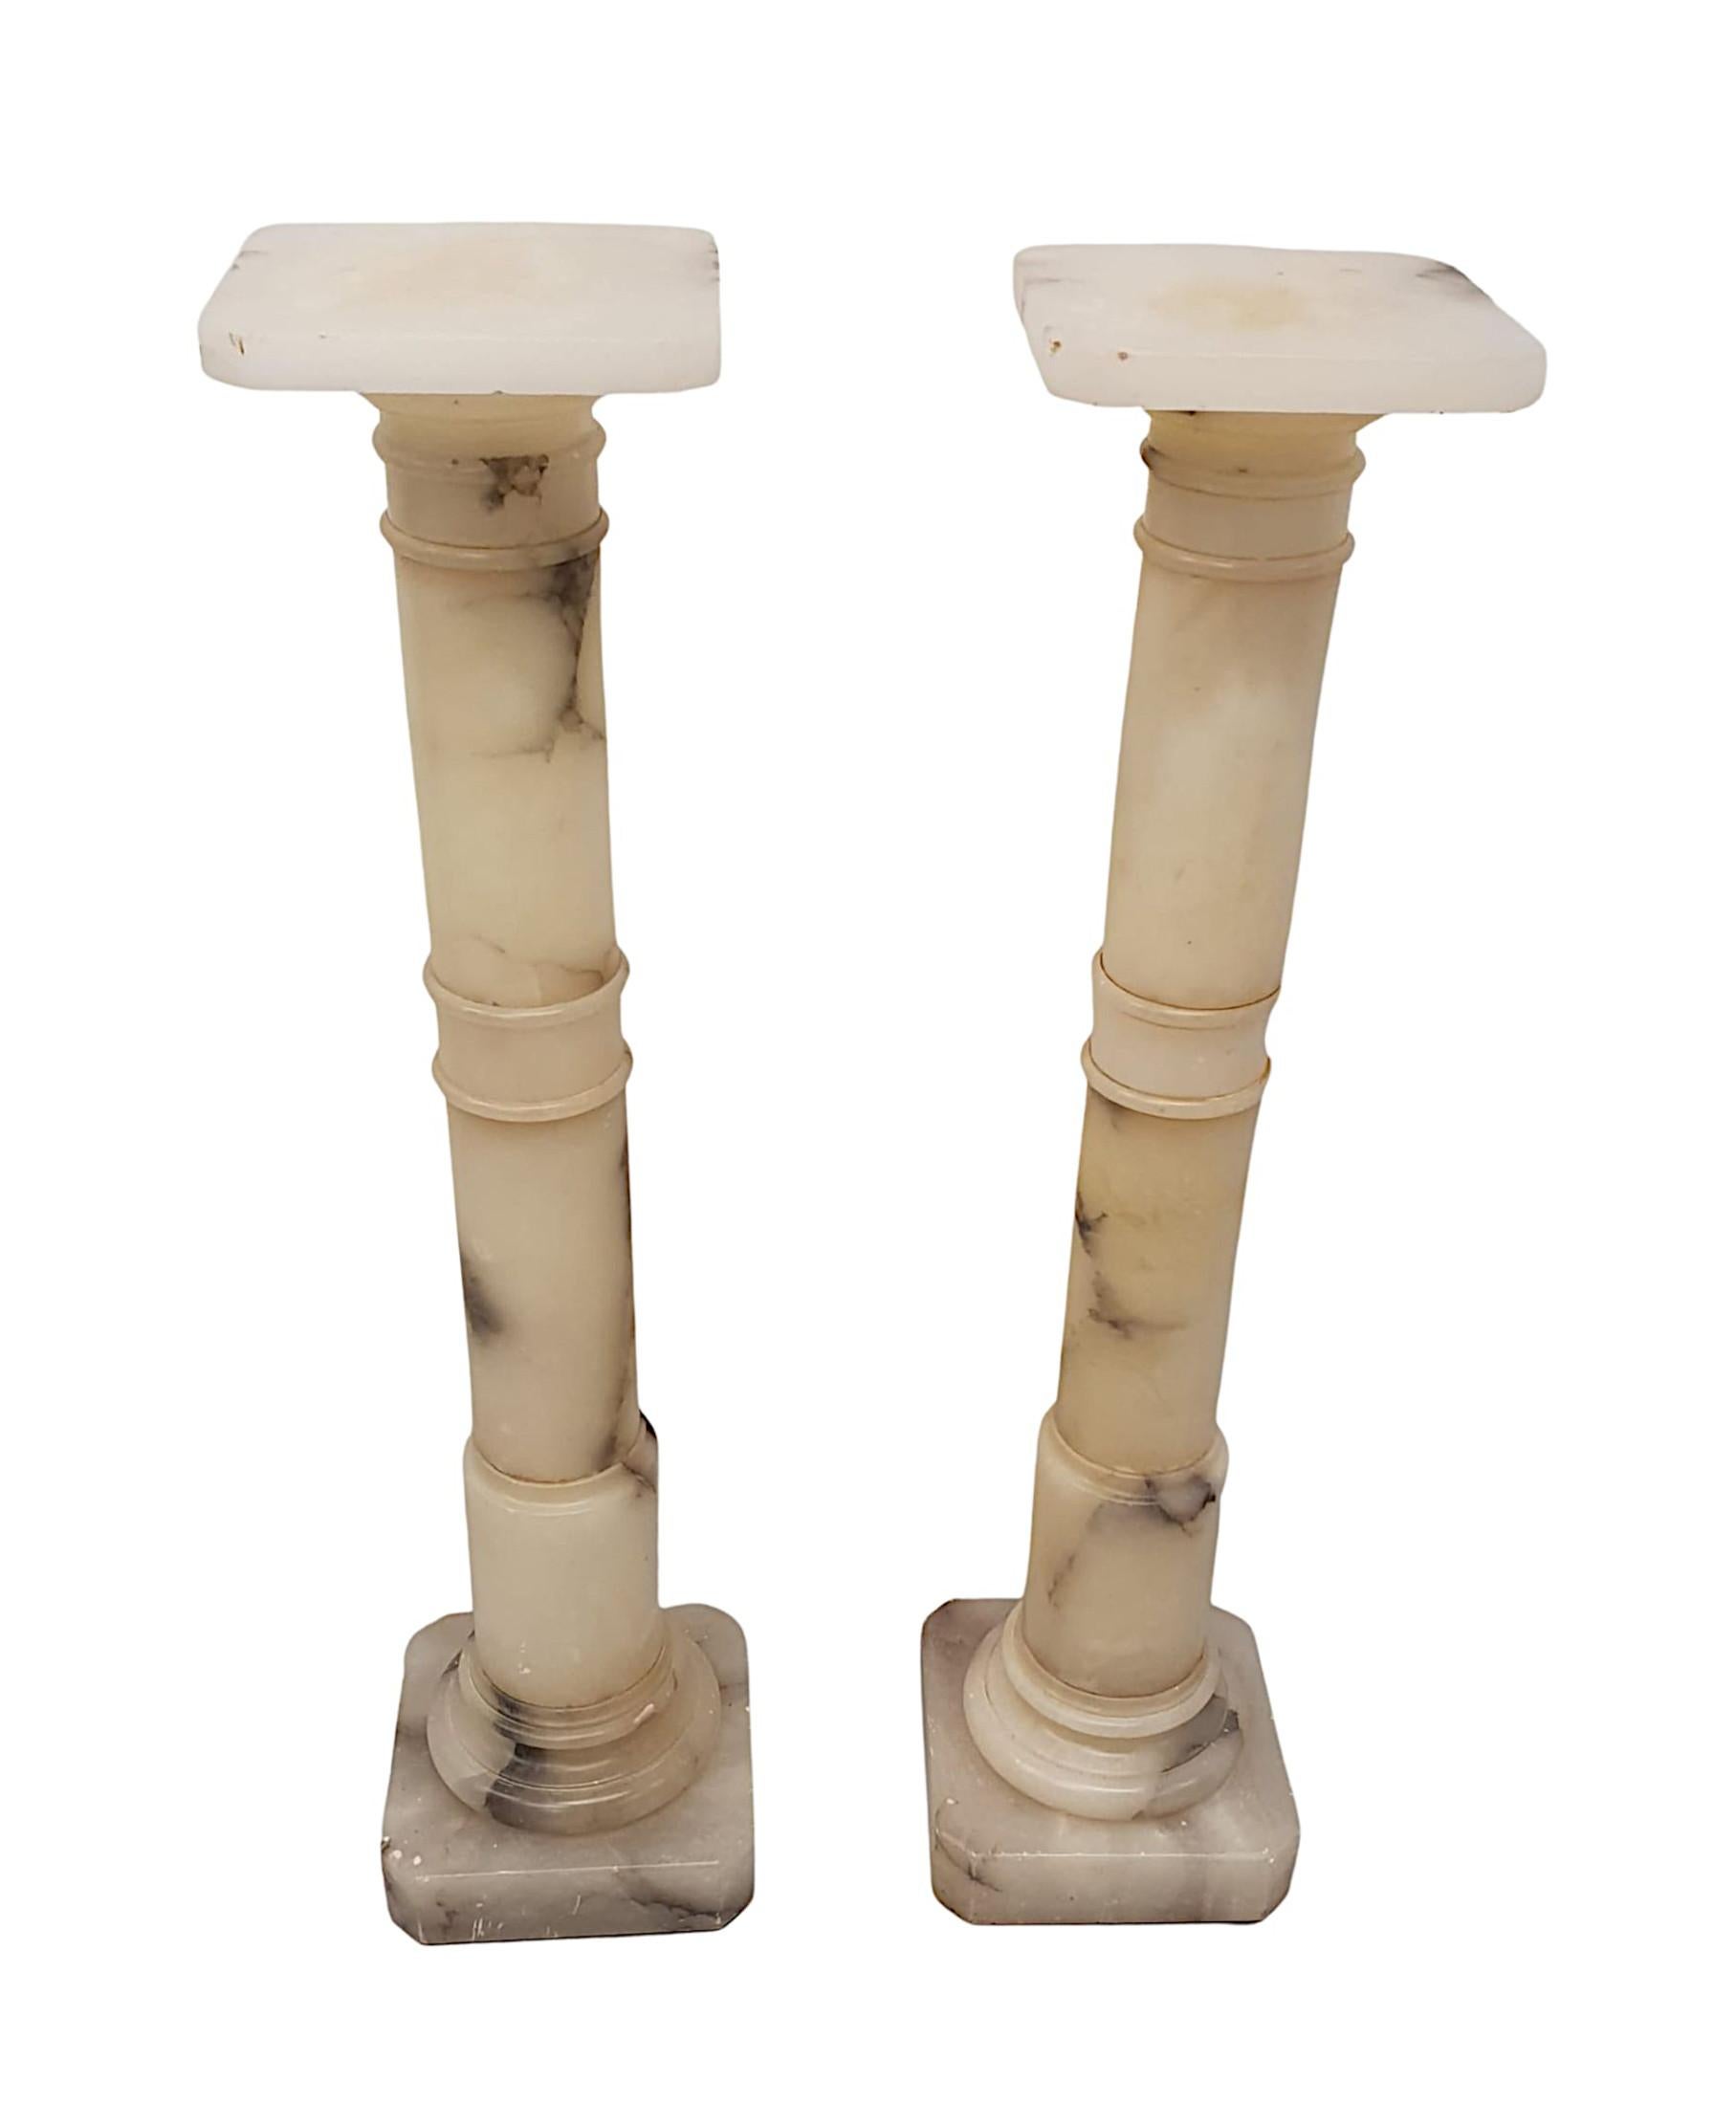 A stunning pair of early 20th Century Italian, finely hand carved alabaster bust or plant stands in the Neoclassical manner. The moulded top of octagonal form raised over elegant, ring turned gun barrel column, supported on octagonal plinth base.